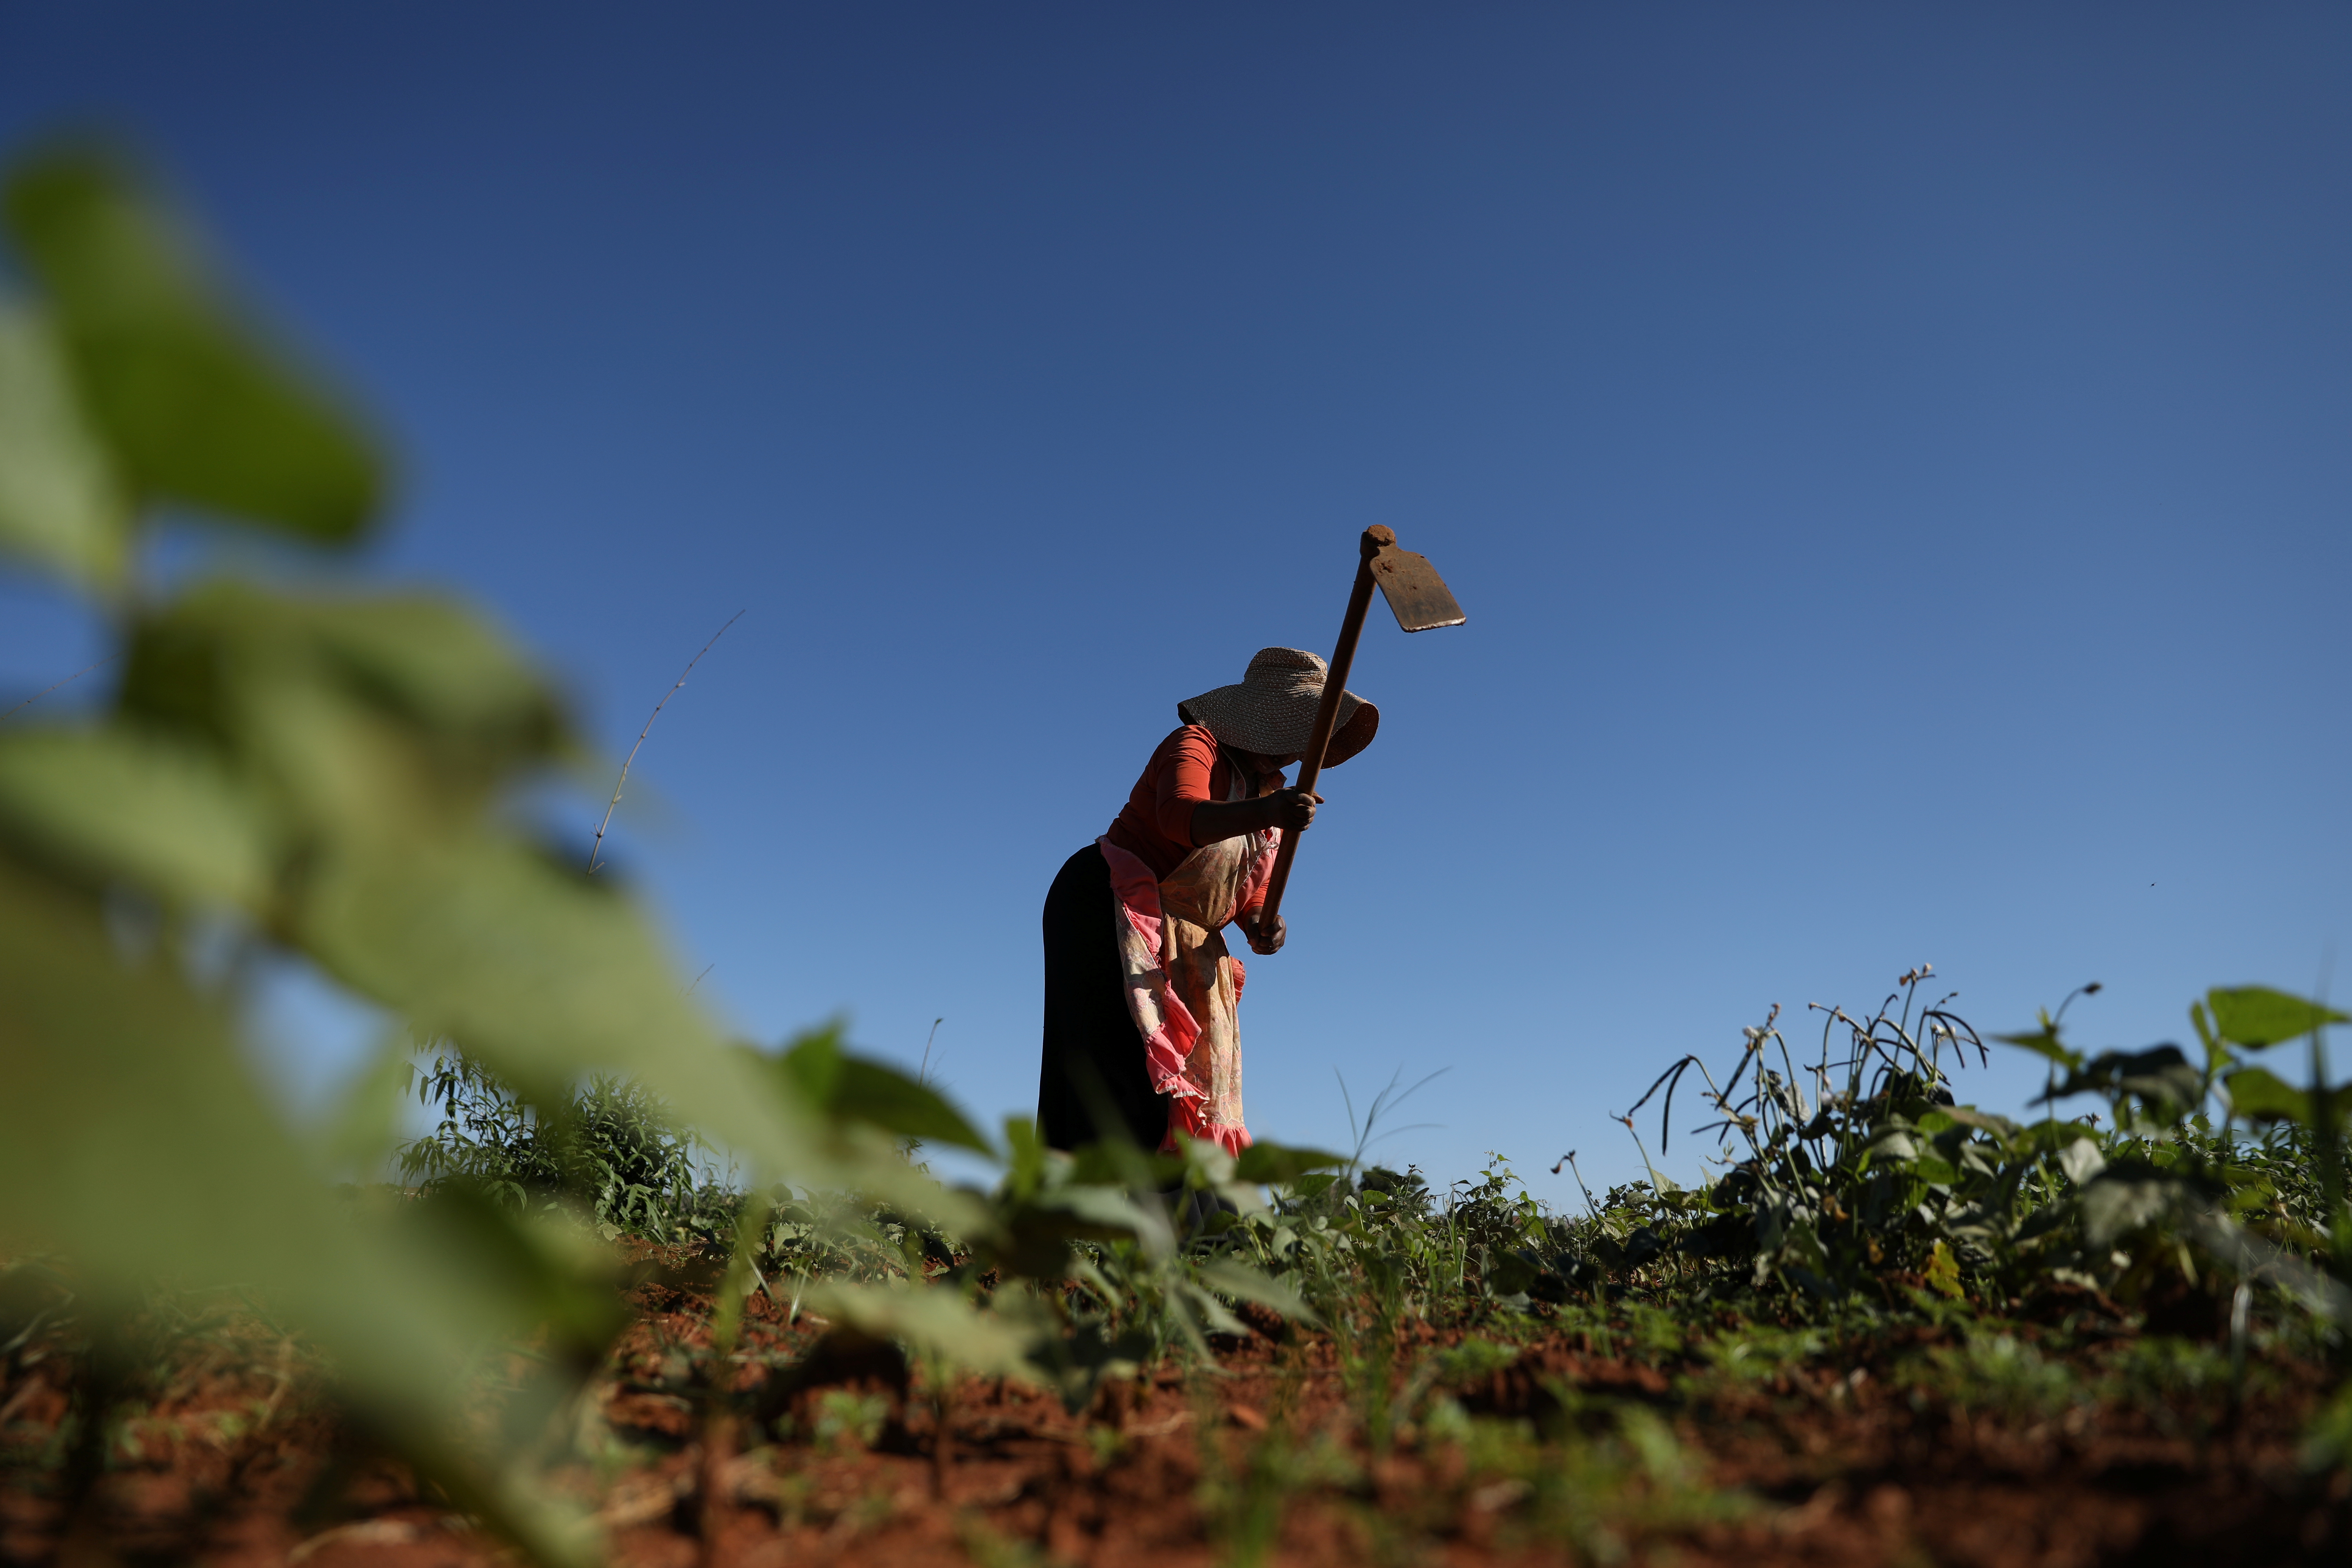 NobuthoThethani, a local farmer works the land at Lawley informal settlement in the south of Johannesburg